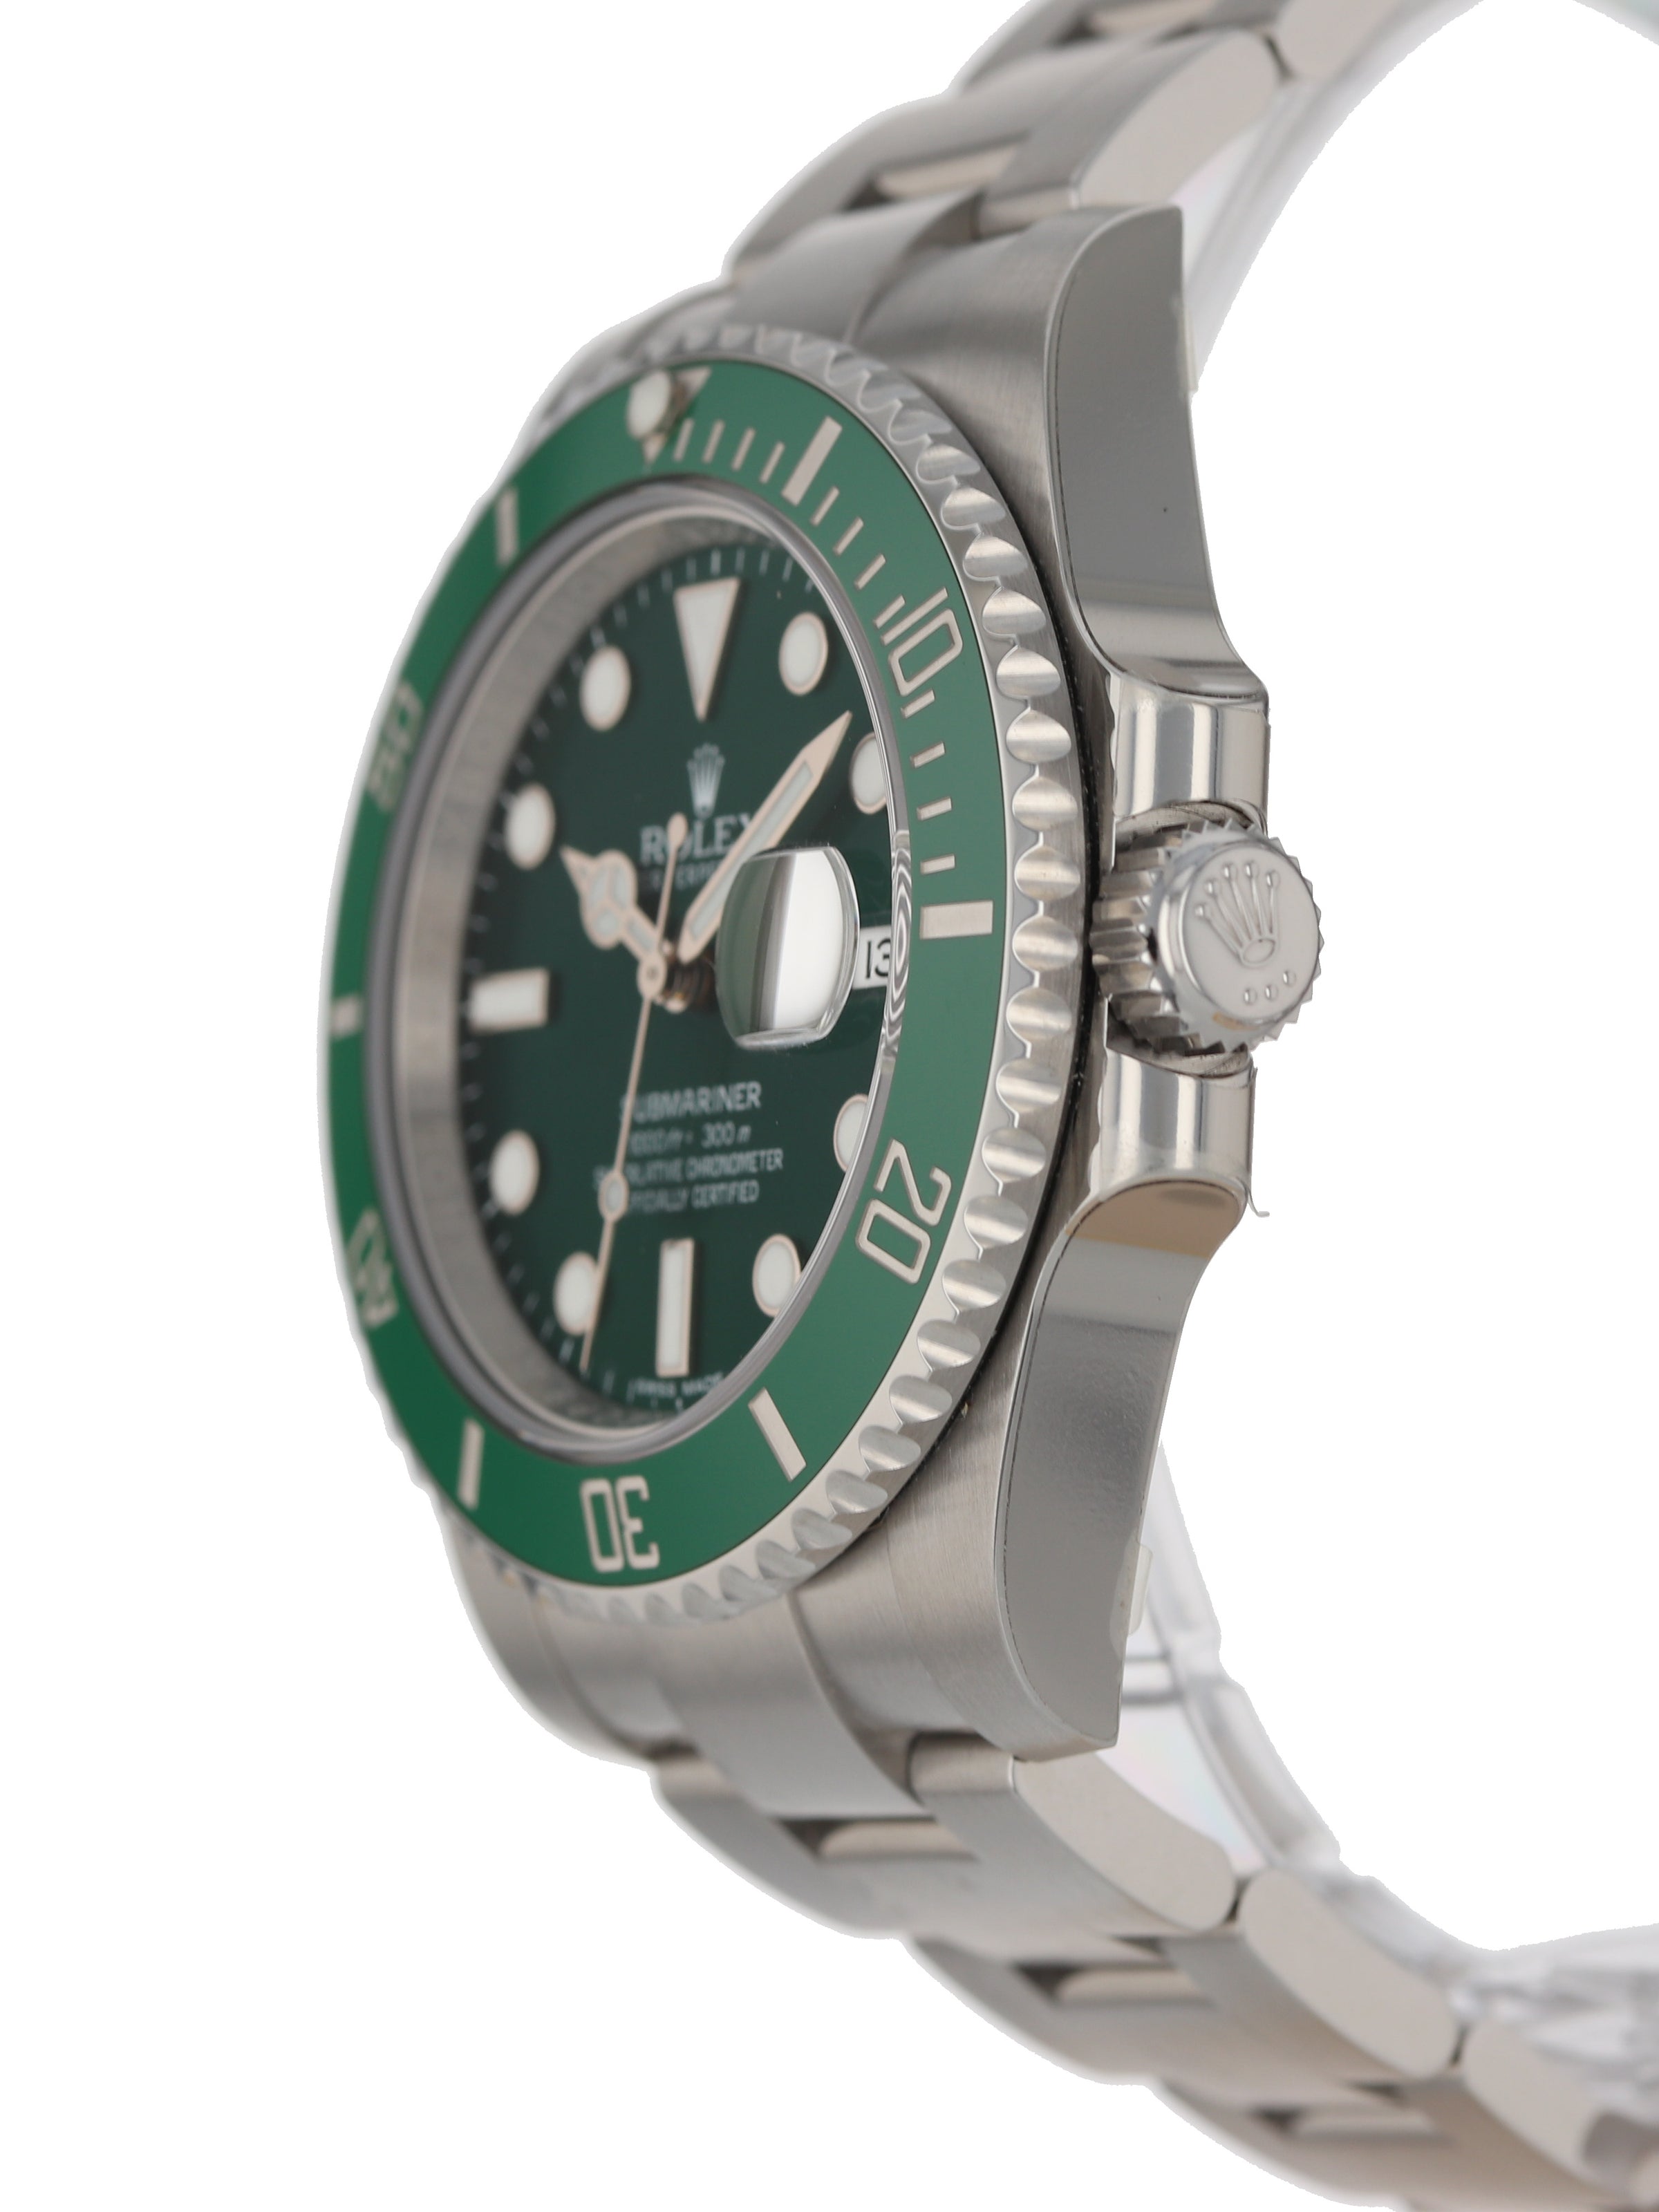 Buy Rolex Submariner Date Hulk 116610LV Stainless Steel by Twain Time Inc.